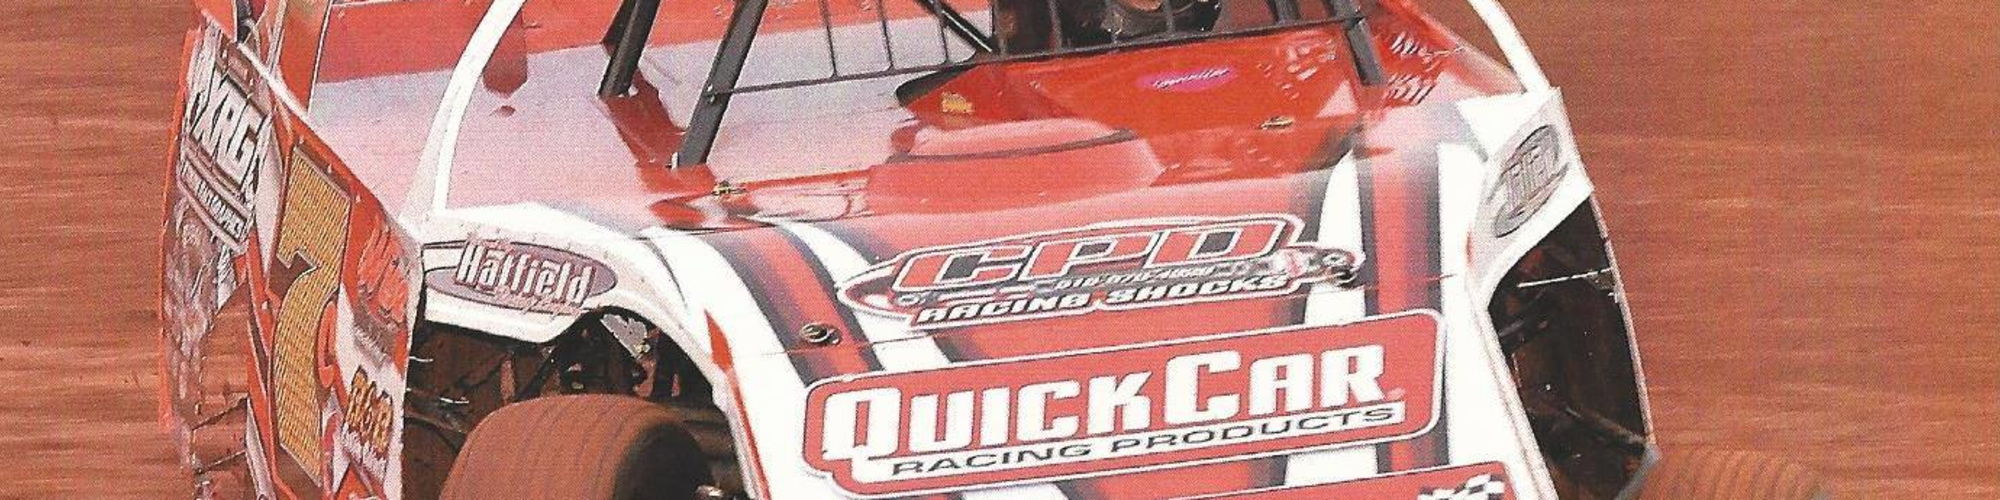 QuickCar Racing Products cover image